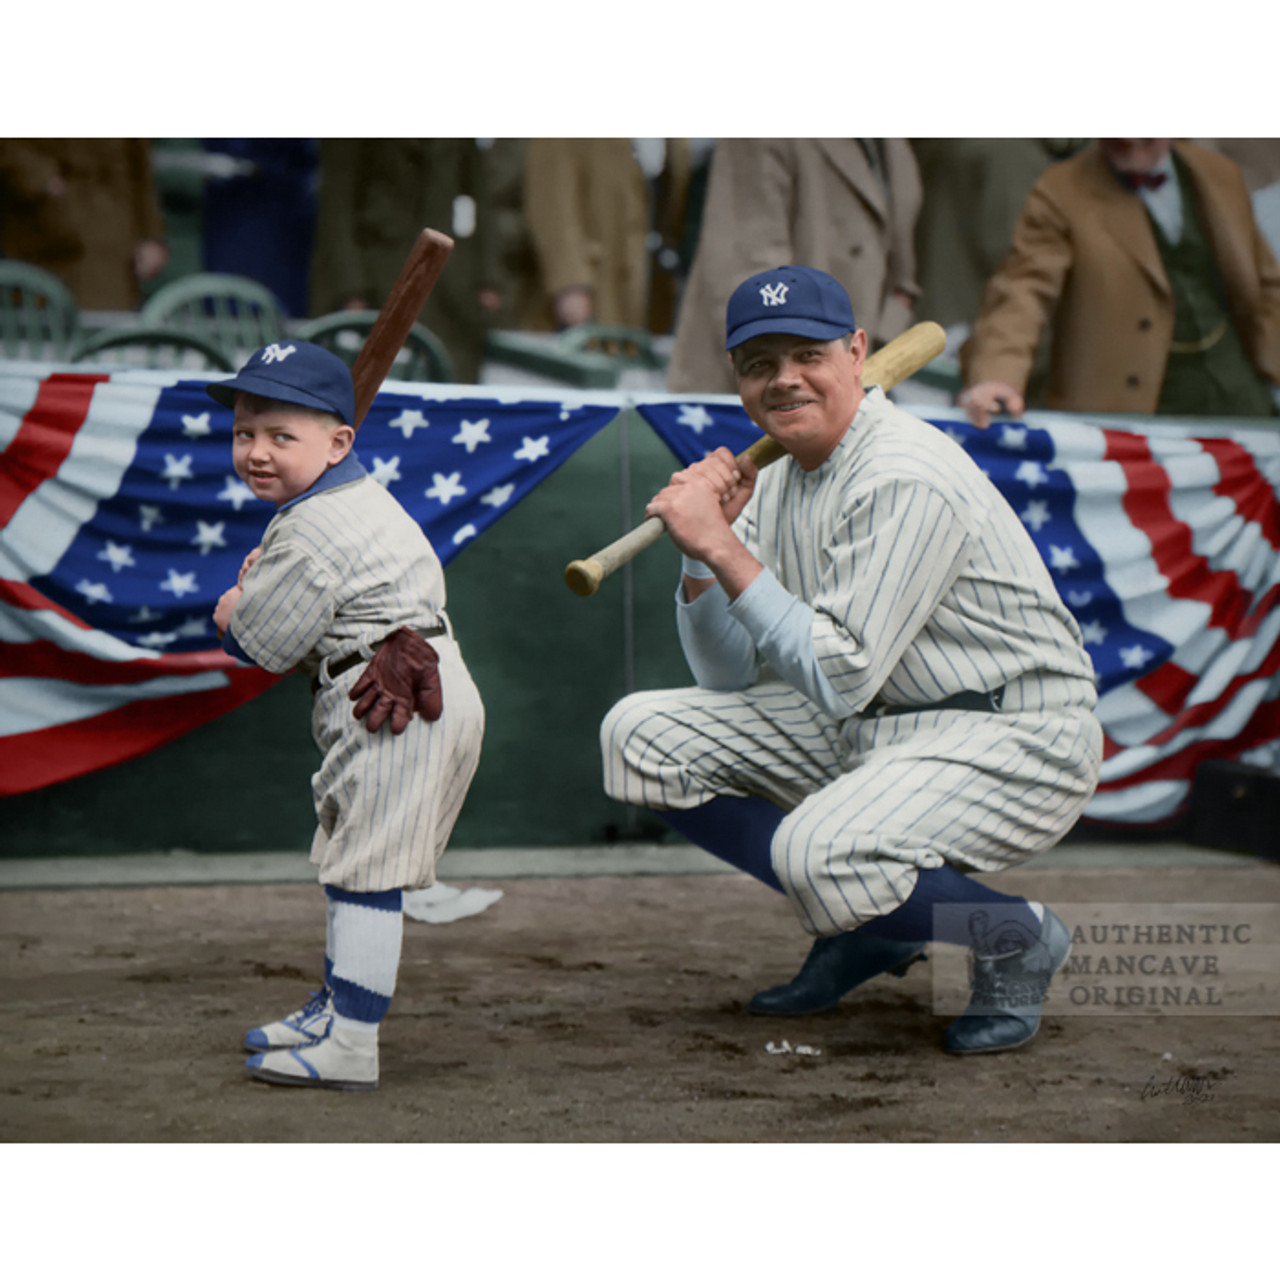 Babe Ruth & Ray Kelly 1923 Posing 11 x 14 Colorized Print